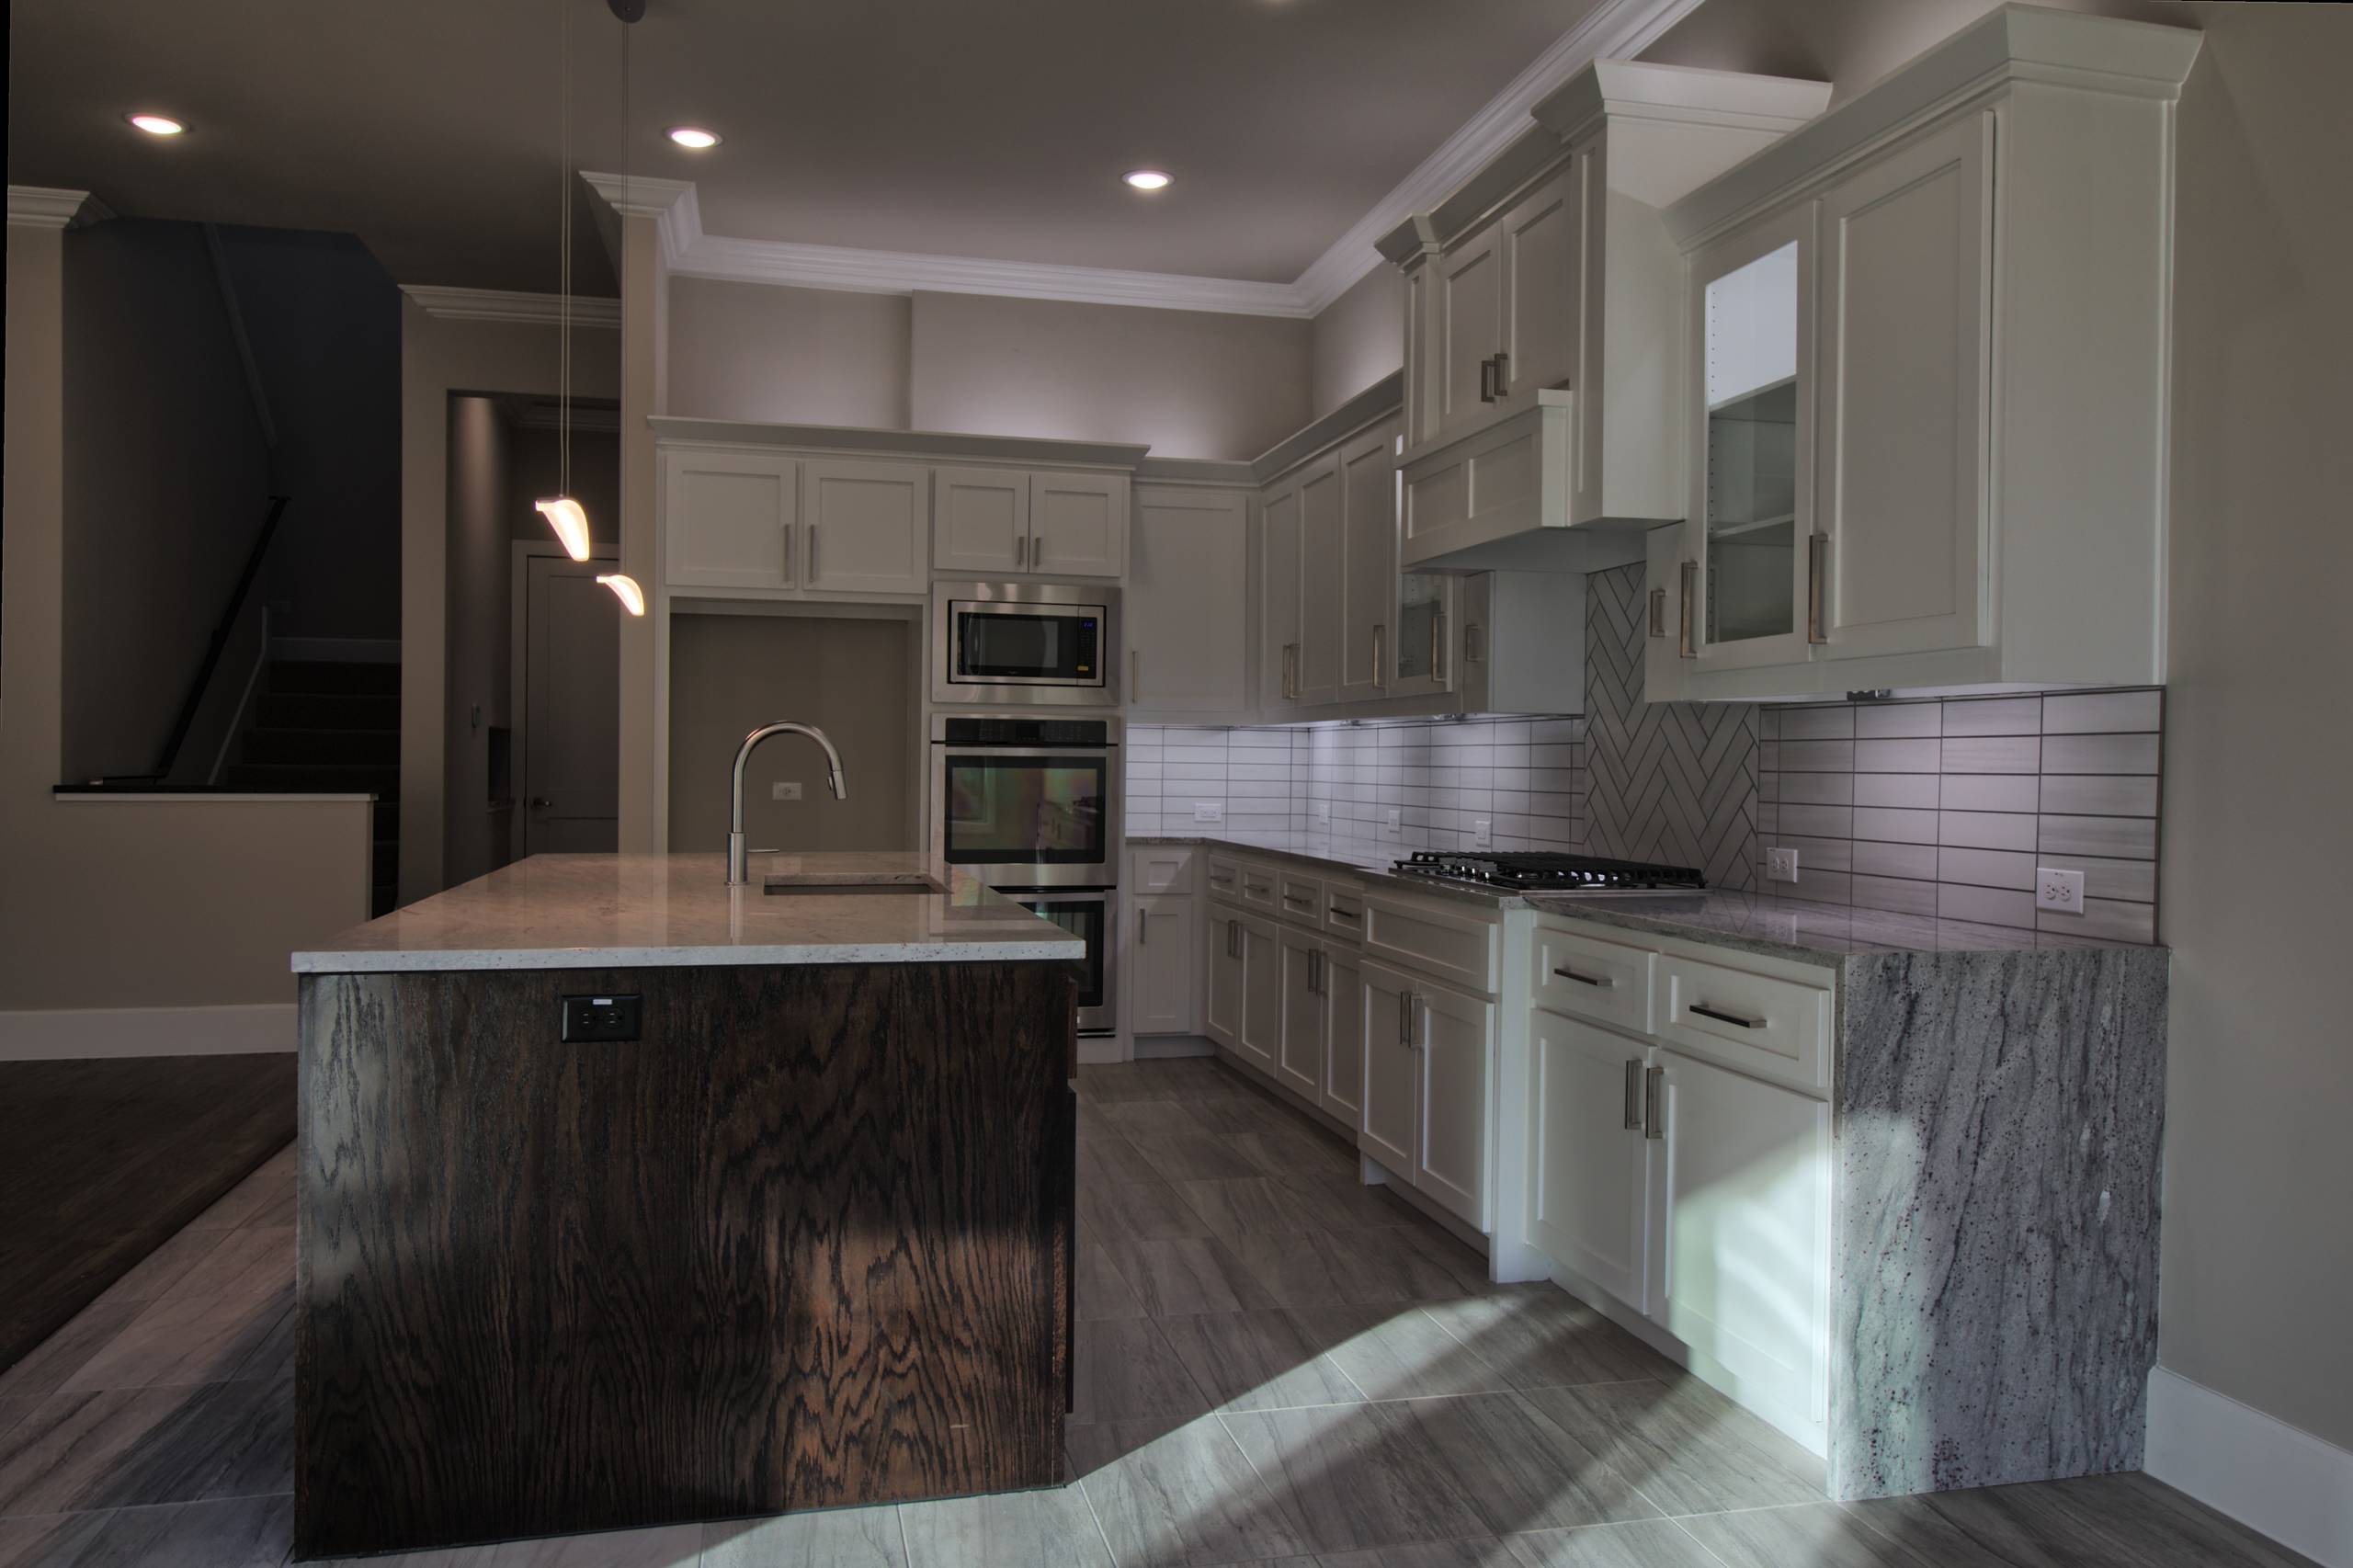 Woodland Hills Transitional With Contemporary Touches